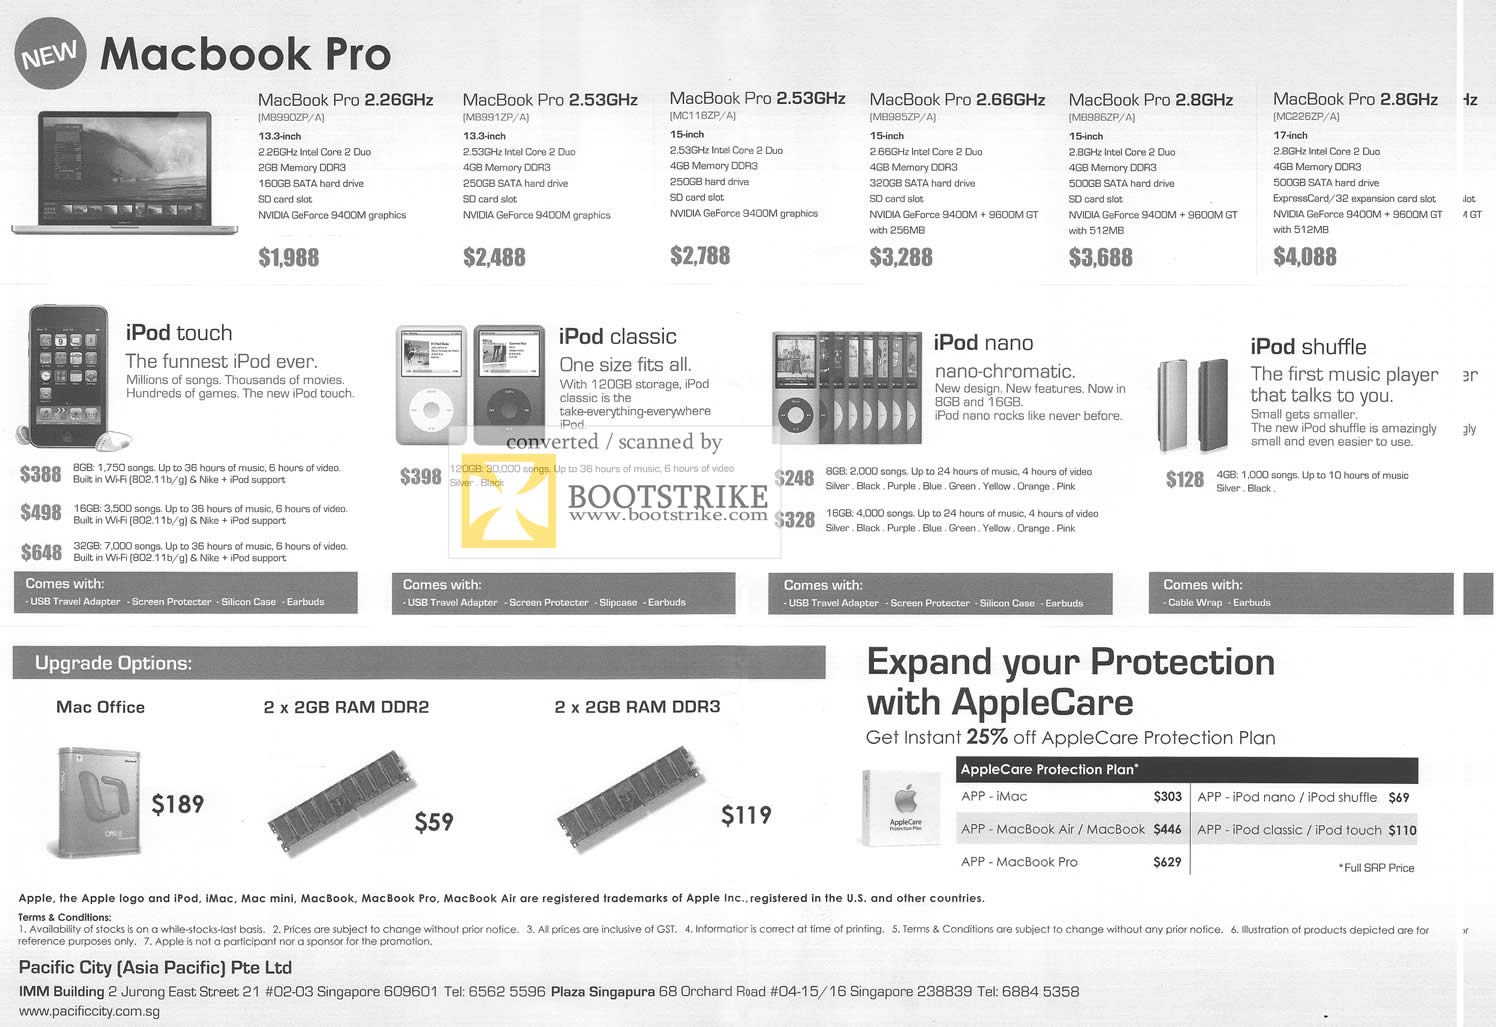 PC Show 2009 price list image brochure of Apple Pacific City MacBook Pro IPod Touch Classic Nano Shuffle